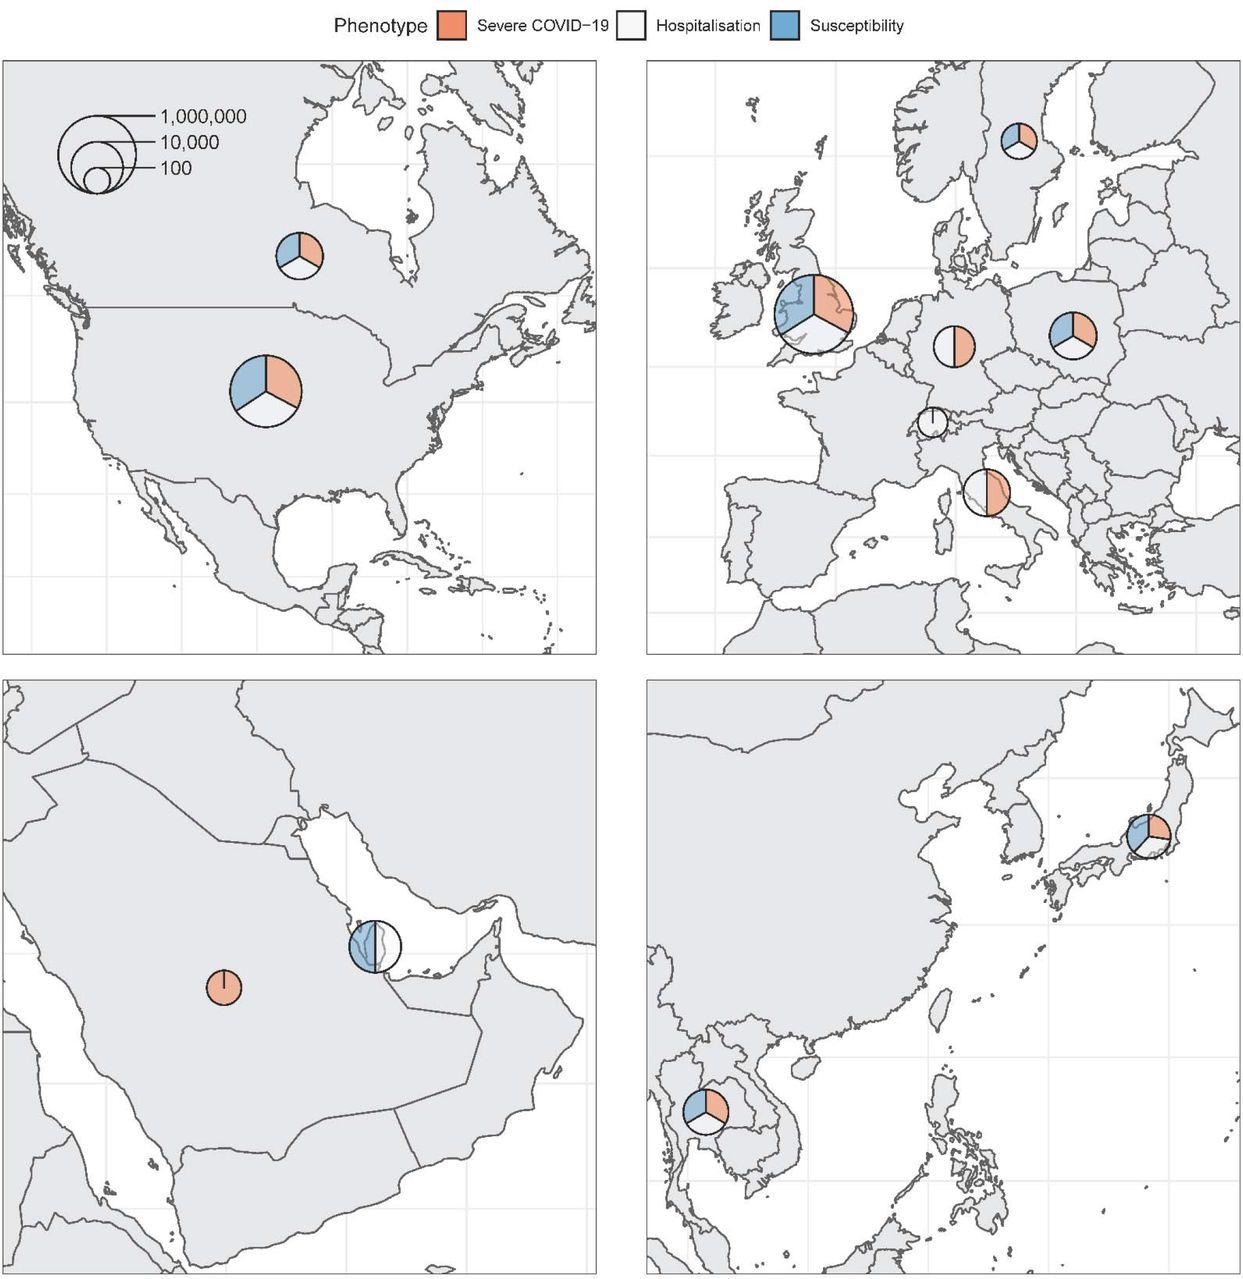 Maps of countries contributing data to the consortium. Sample sizes (cases and controls) for each phenotype were added and represented on the logarithmic scale by each circle. Relative contribution to each phenotype is represented by the three colors.